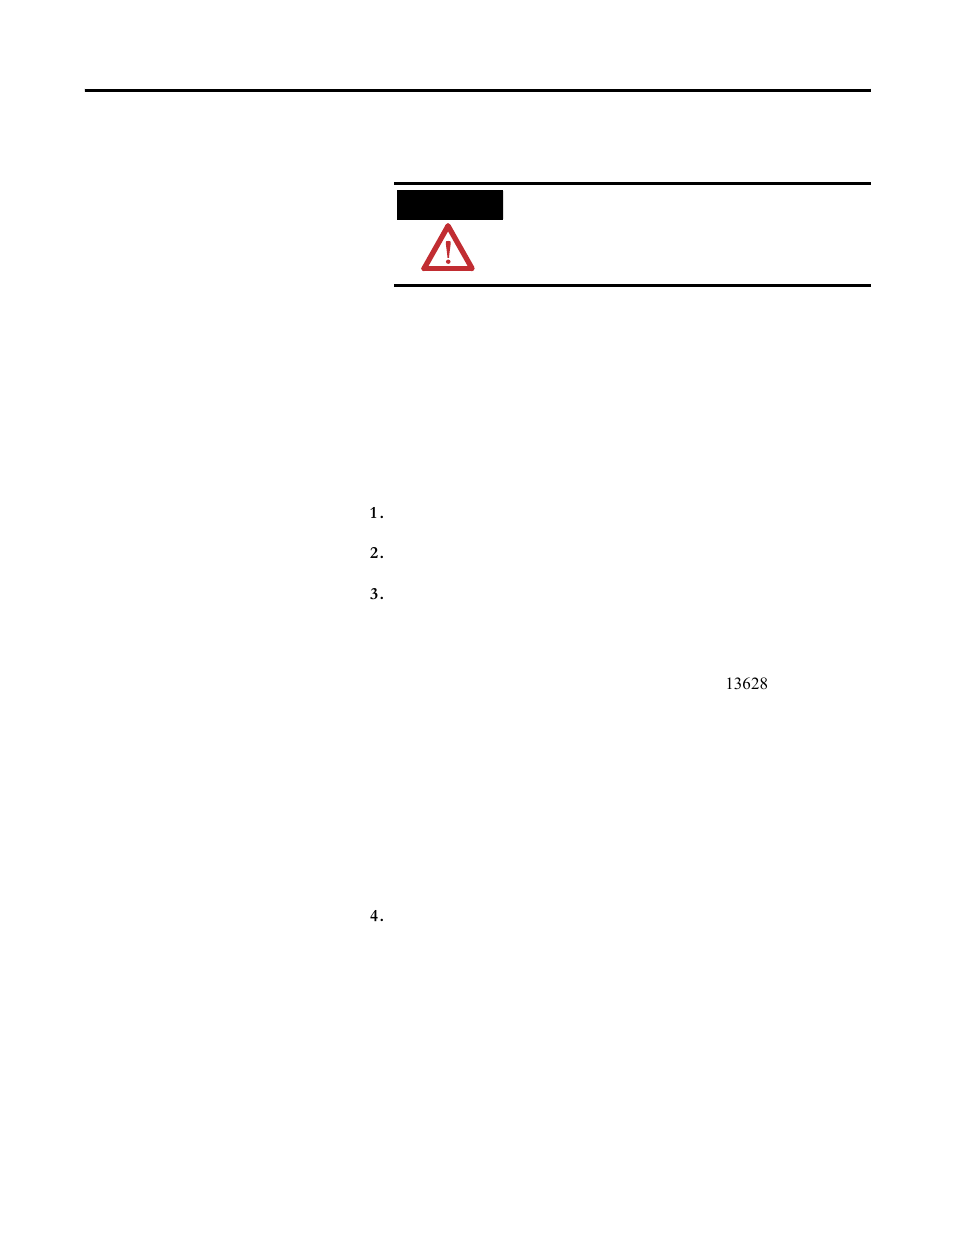 Slc 500 i/o configuration for the 1747-scnr module | Rockwell Automation 1747-SCNR ControlNet Scanner Module Reference Manual User Manual | Page 20 / 144